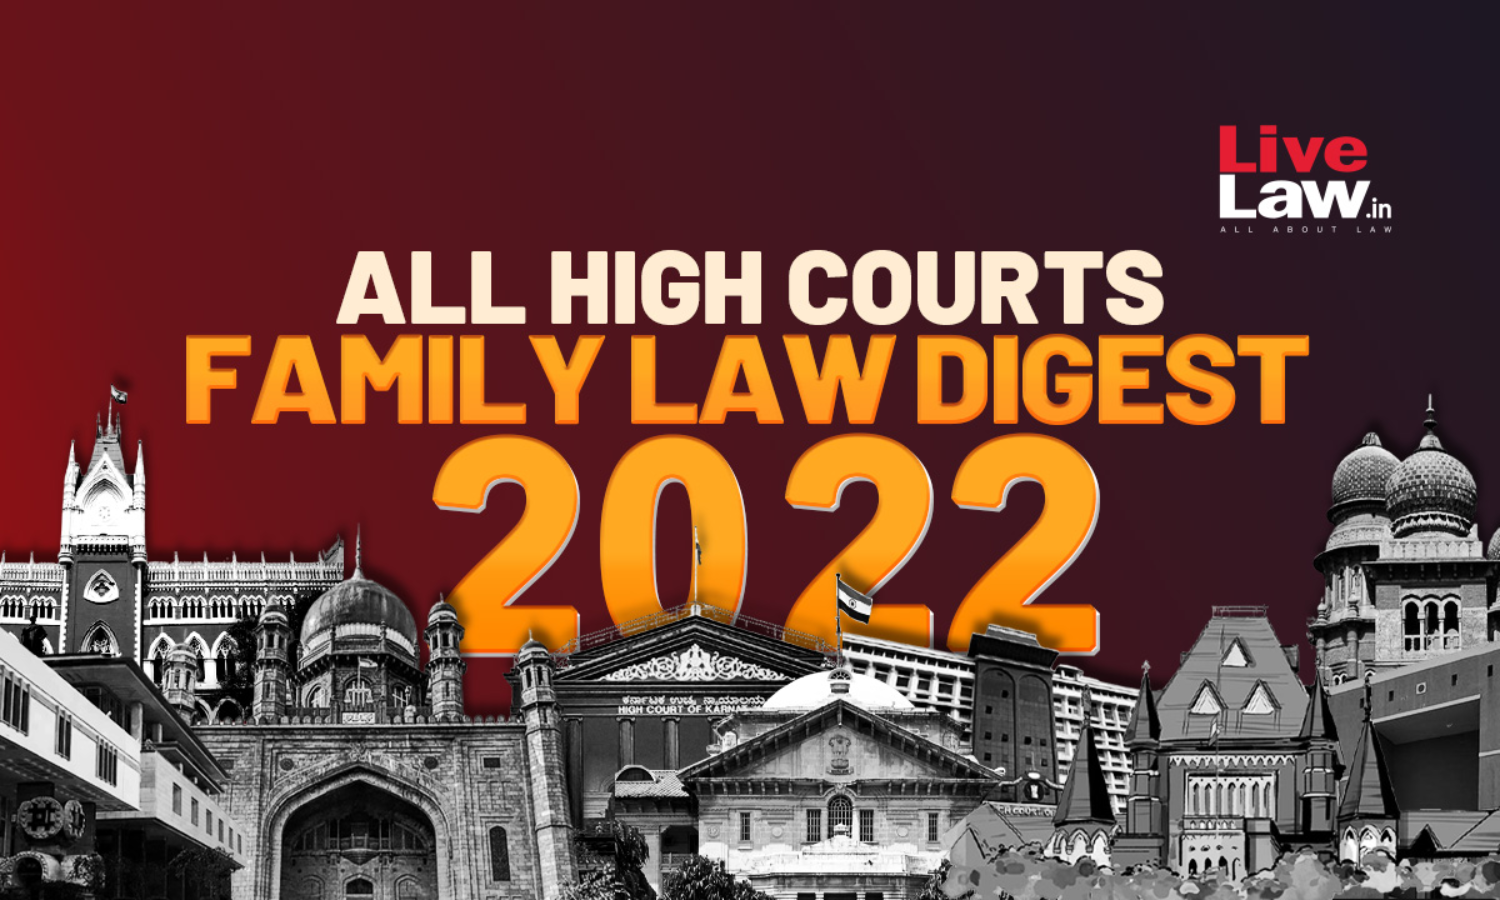 All High Courts Family Law Digest 2022 image